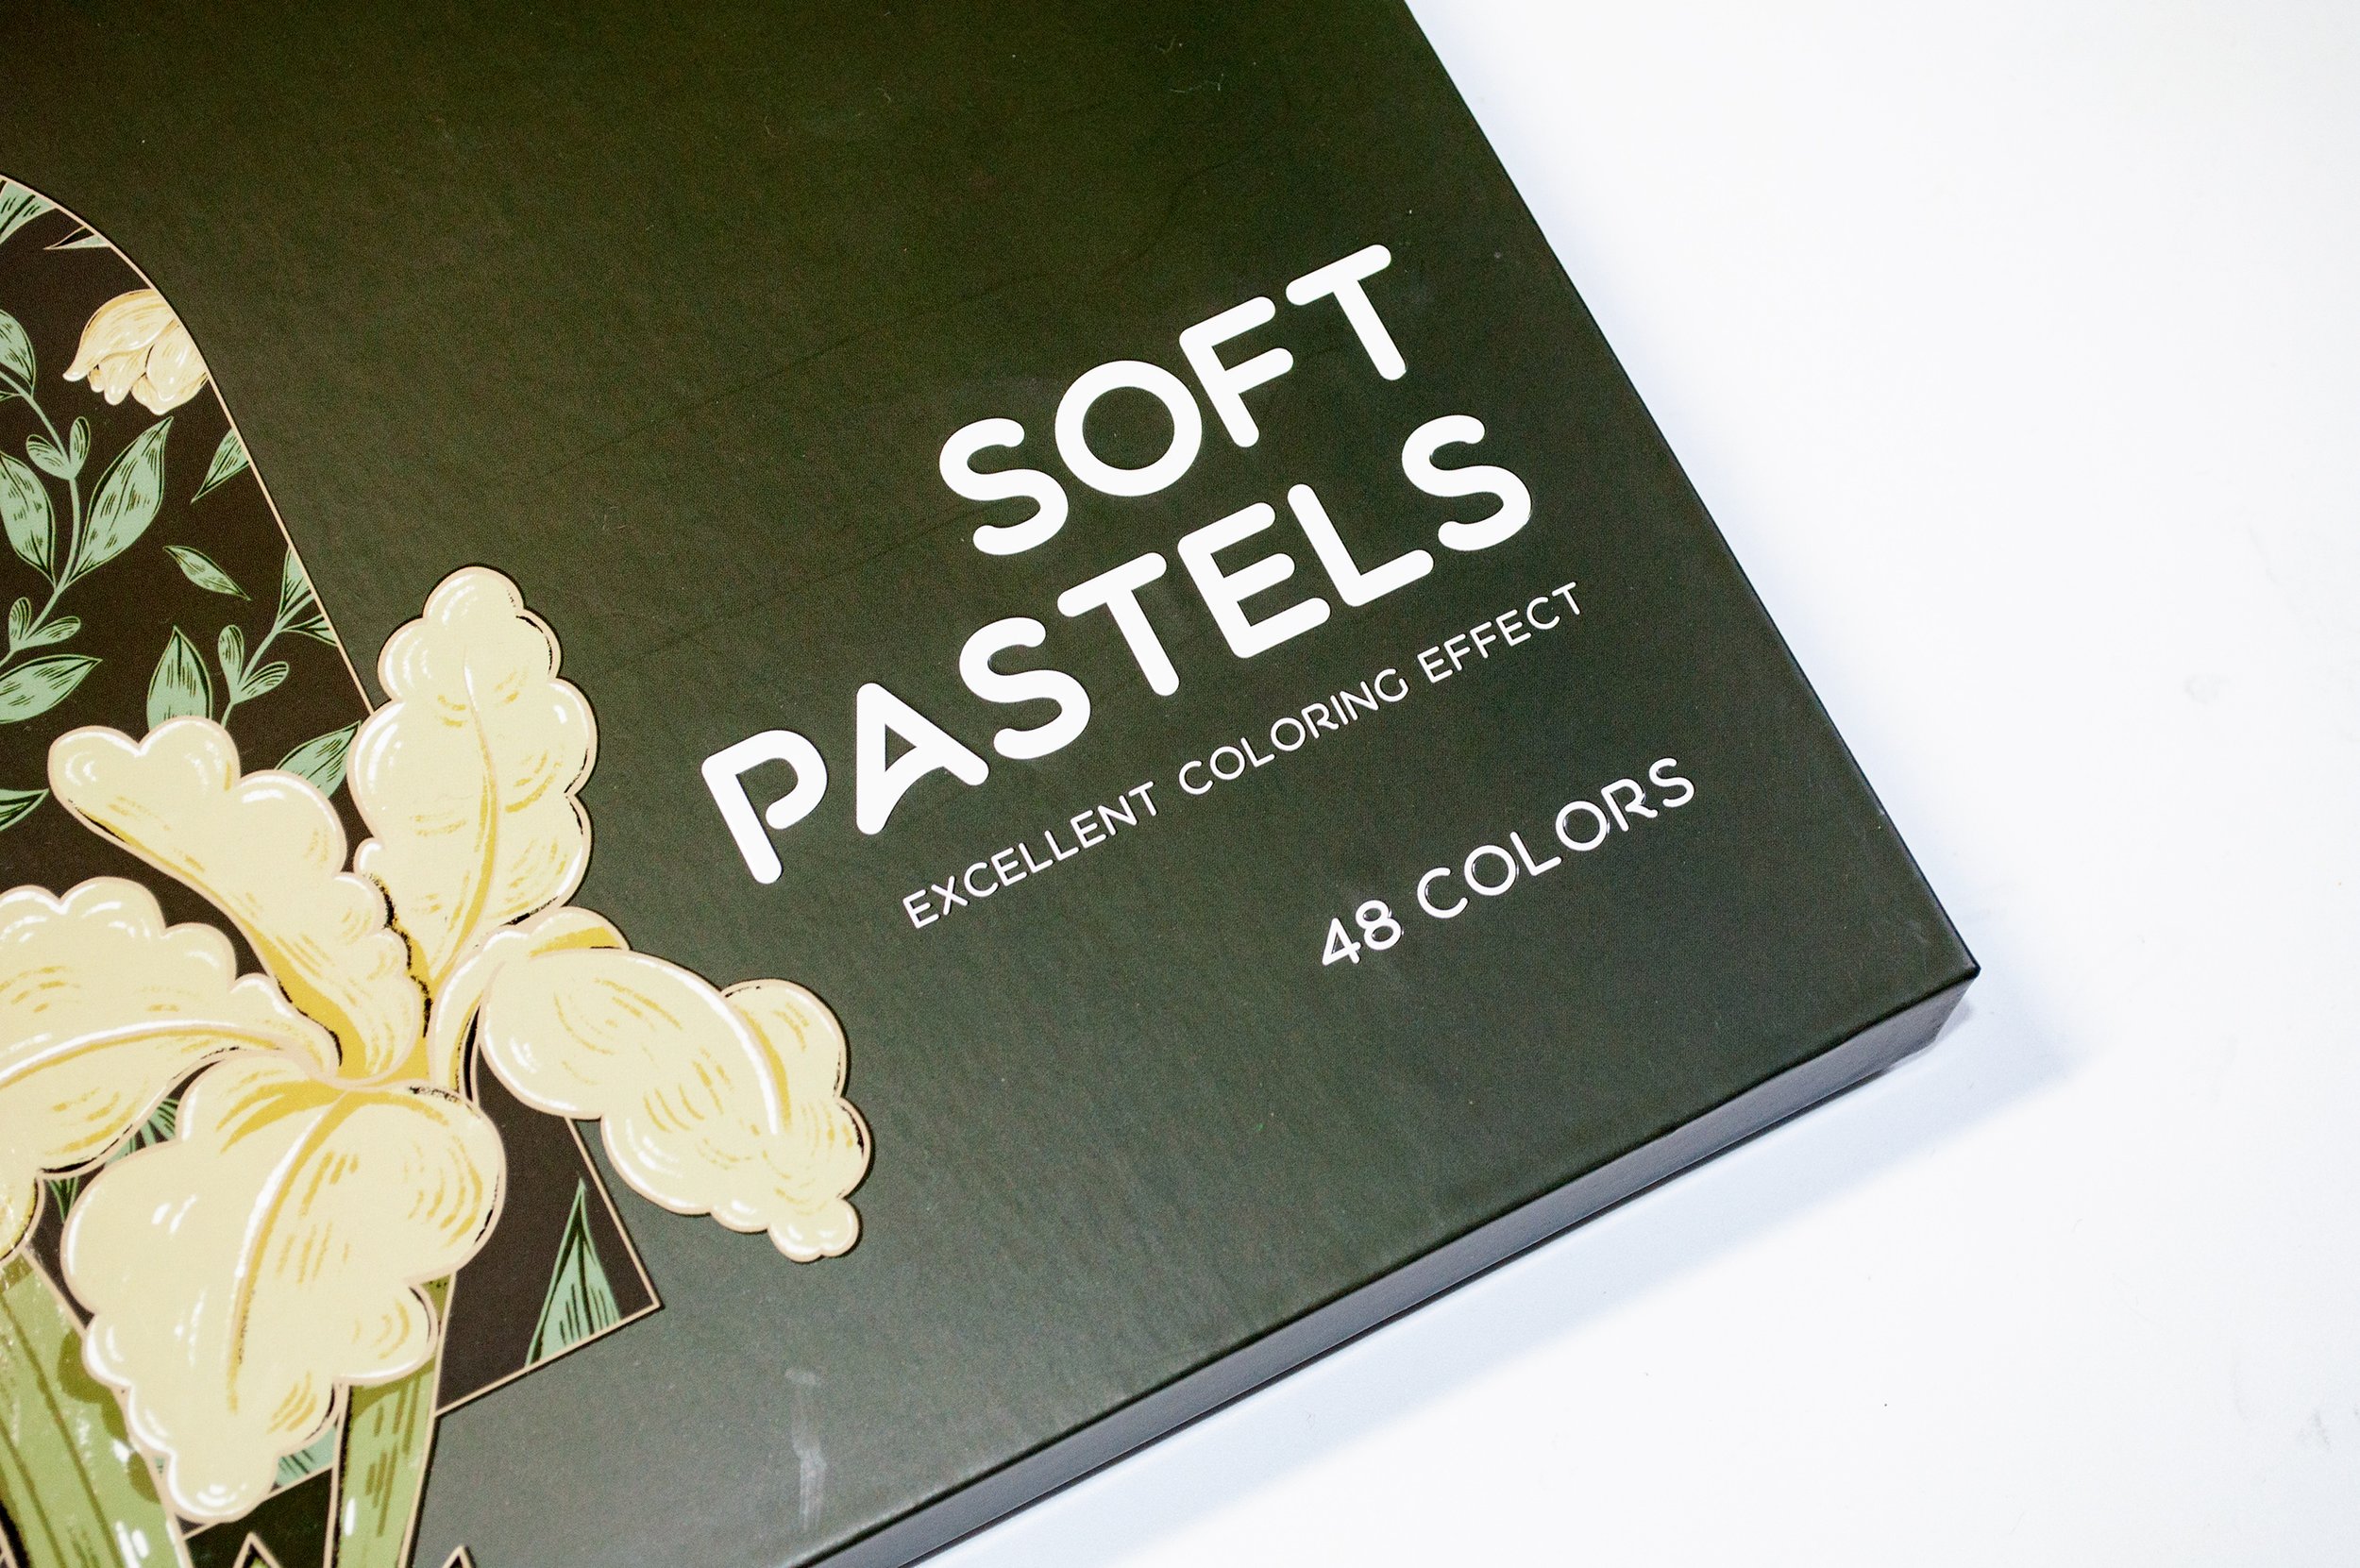 How to Make Your Own Sanded Pastel Paper